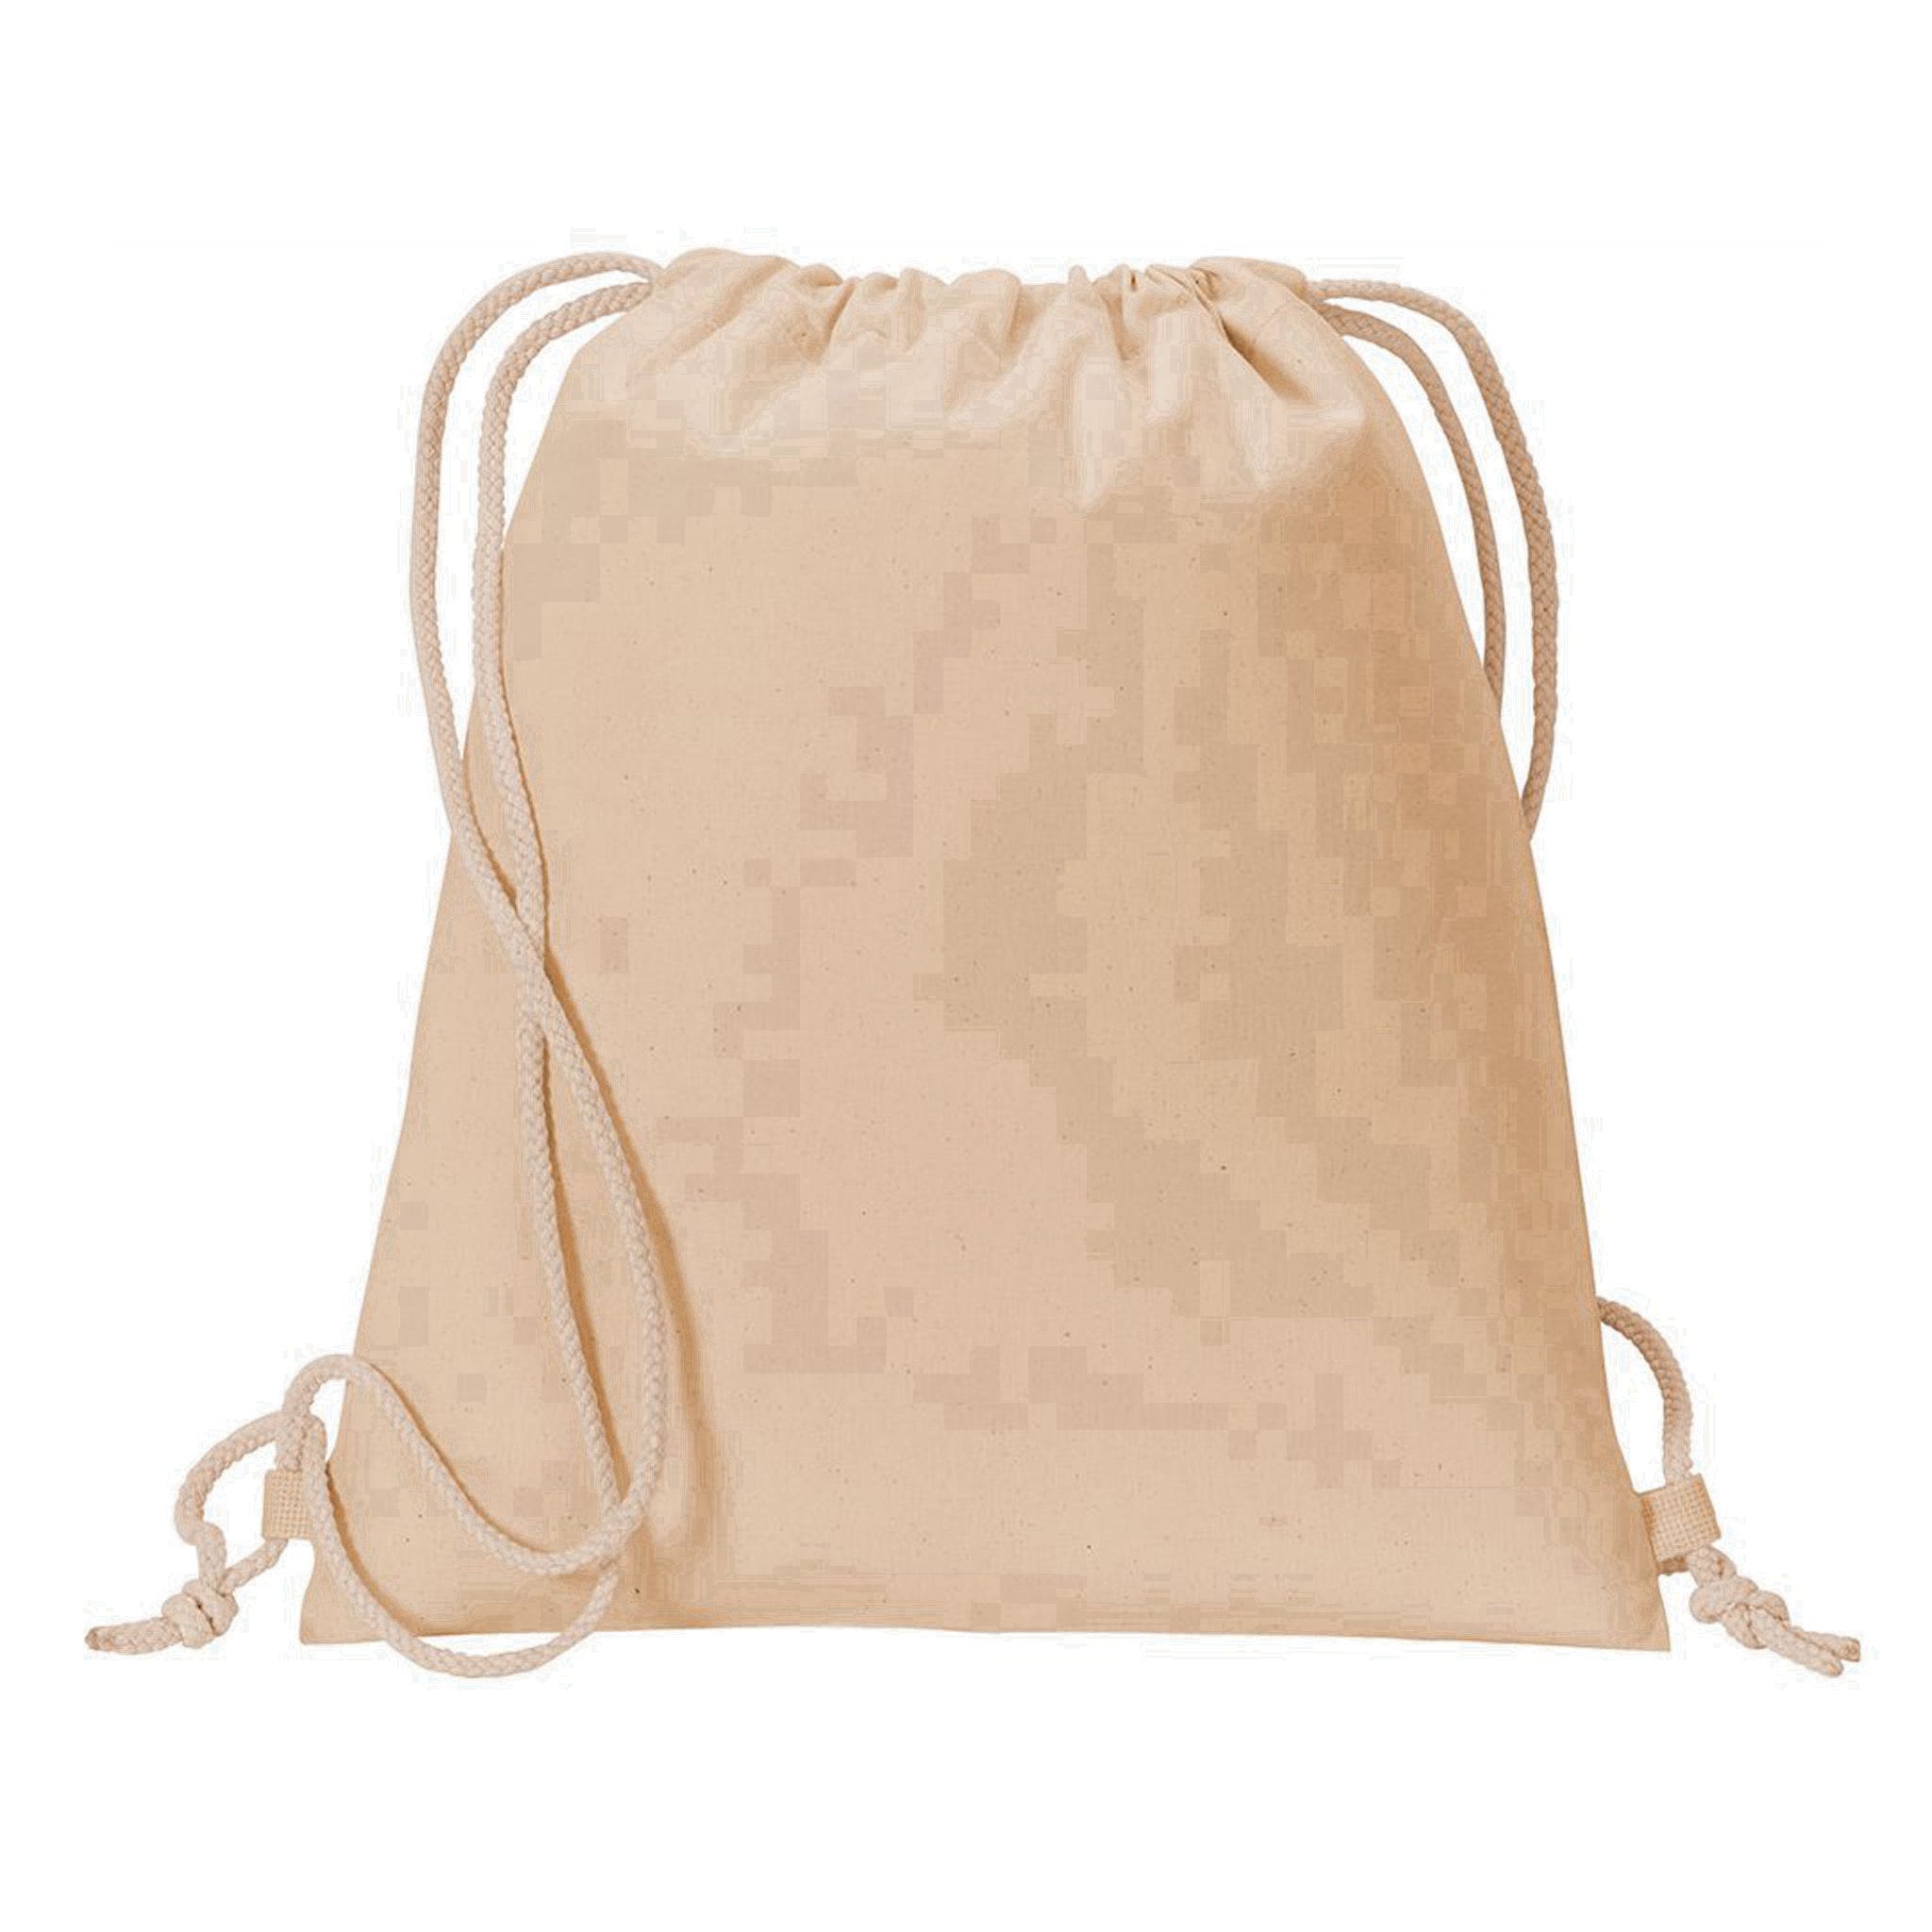 Anything You Can Do I Can Do Slower Sloth Drawstring Bag